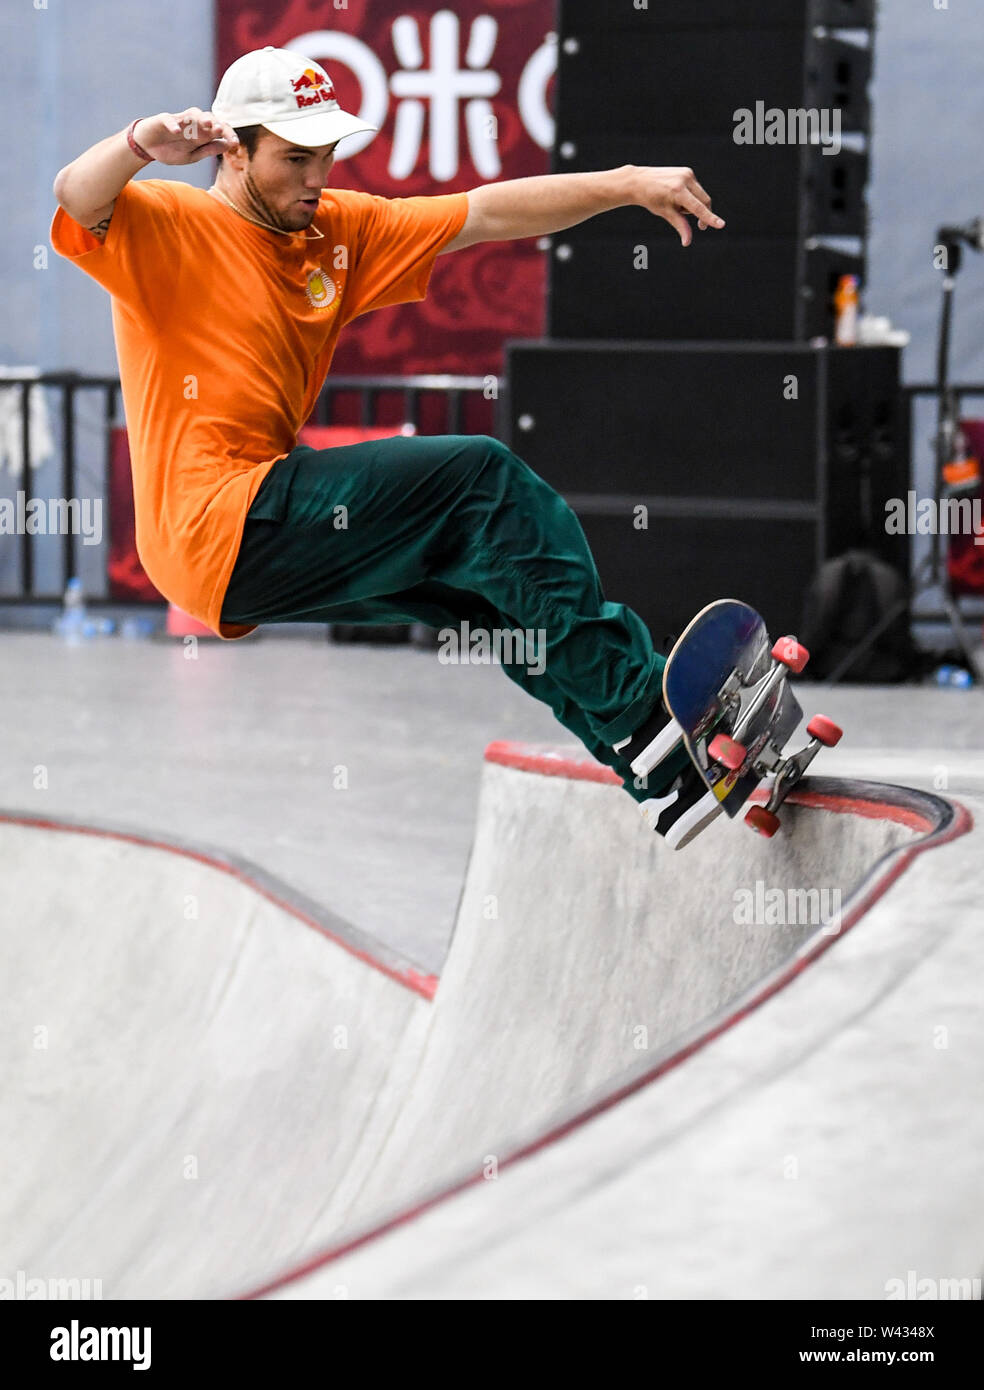 Nanjing. 19th July, 2019. Alex Sorgente of the United States competes  during the men's final at the 2019 International Skateboarding Open in  Nanjing, east China's Jiangsu Province on July 19, 2019. Credit: